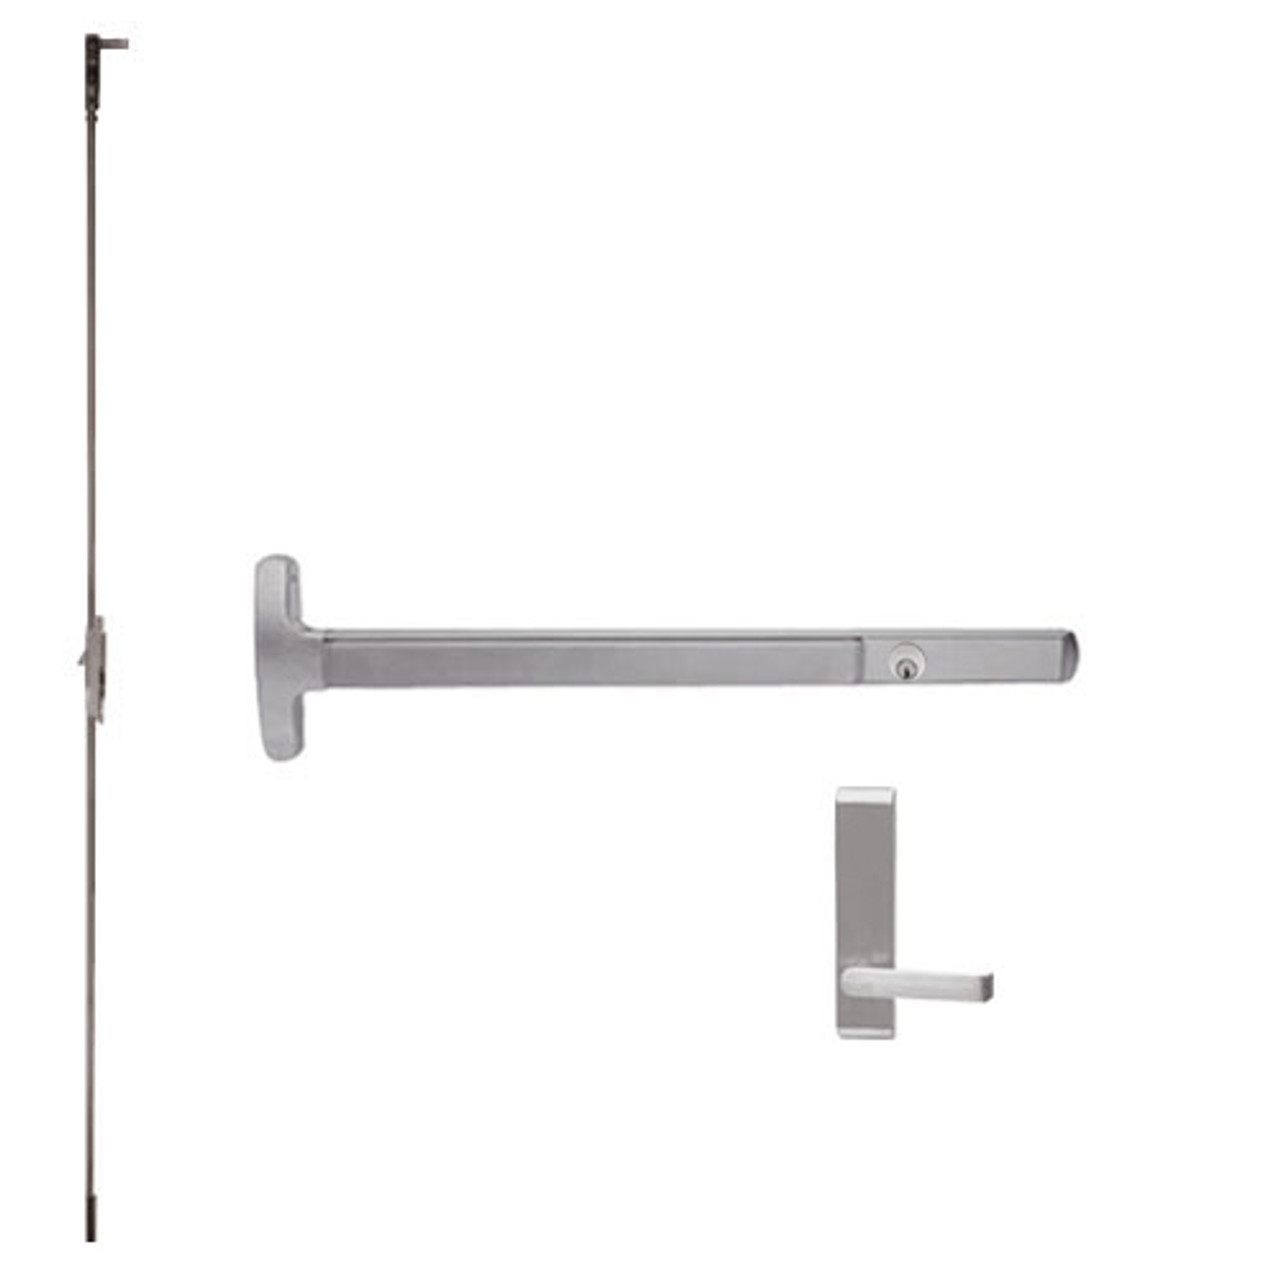 CD24-C-L-BE-DANE-US32D-3-RHR Falcon Exit Device in Satin Stainless Steel